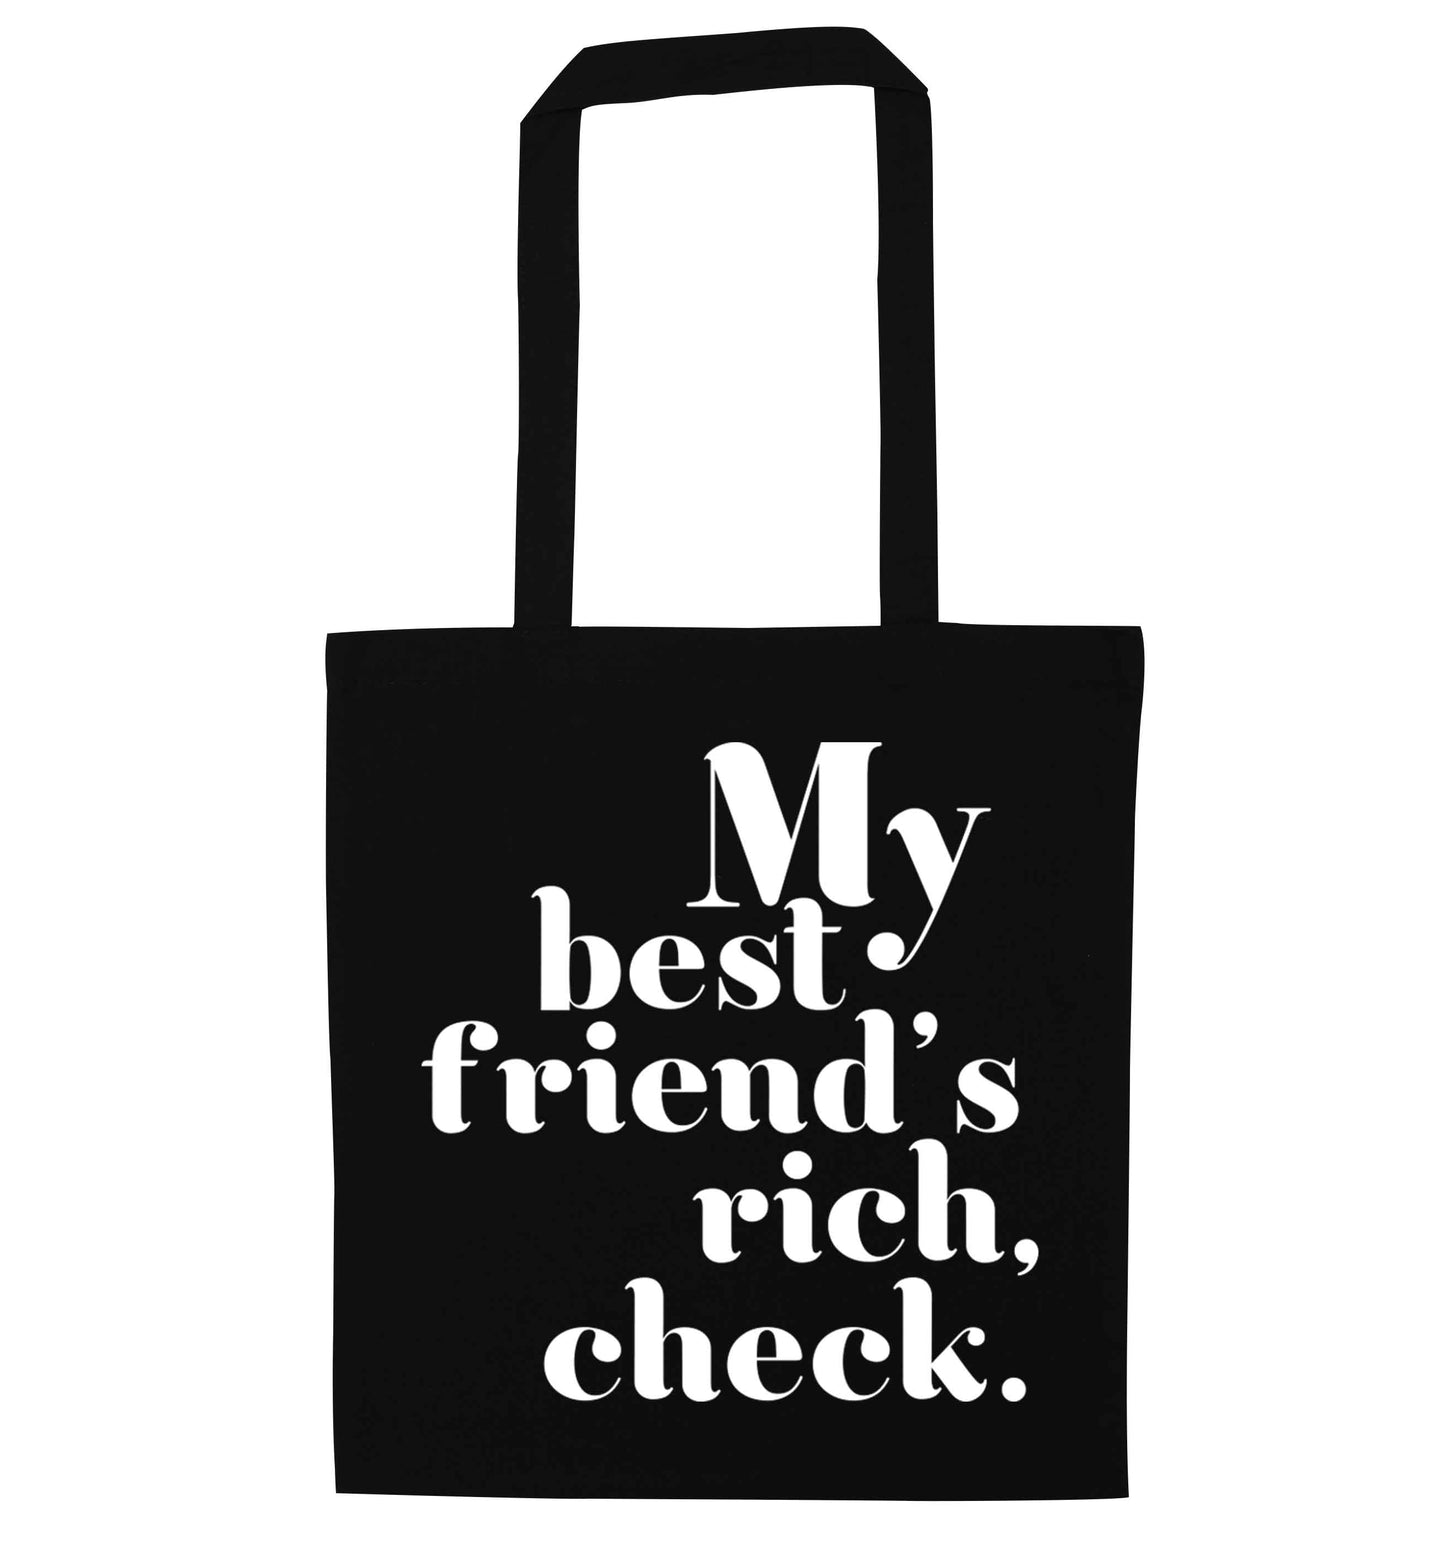 Got a rich best friend? Why not ask them to get you this, just let us  know and we'll tripple the price ;)  black tote bag